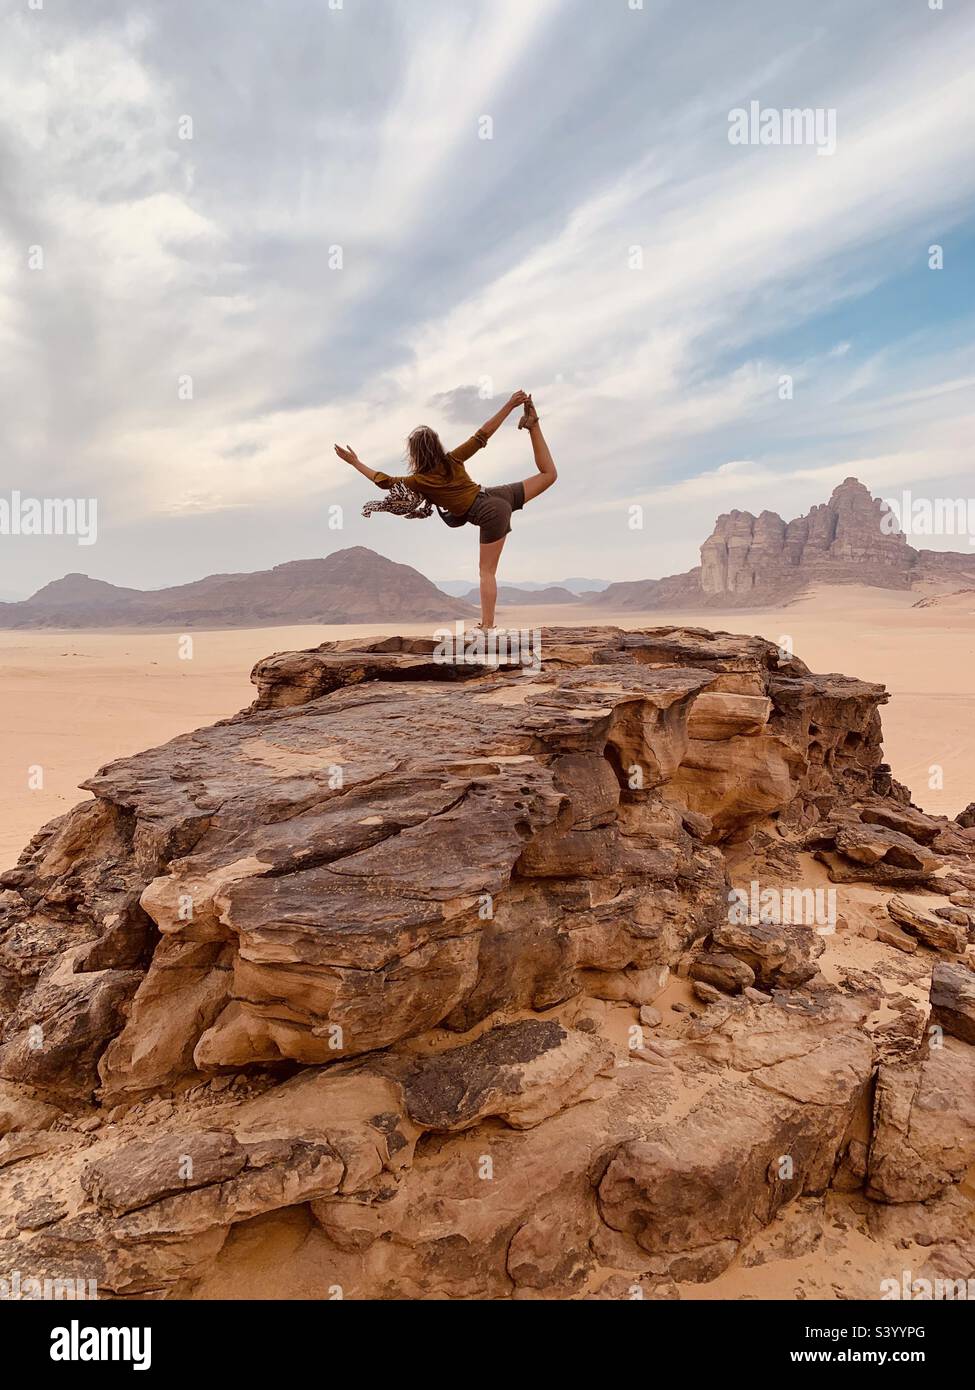 Mature woman in extreme yoga pose in the desert, Stock Photo